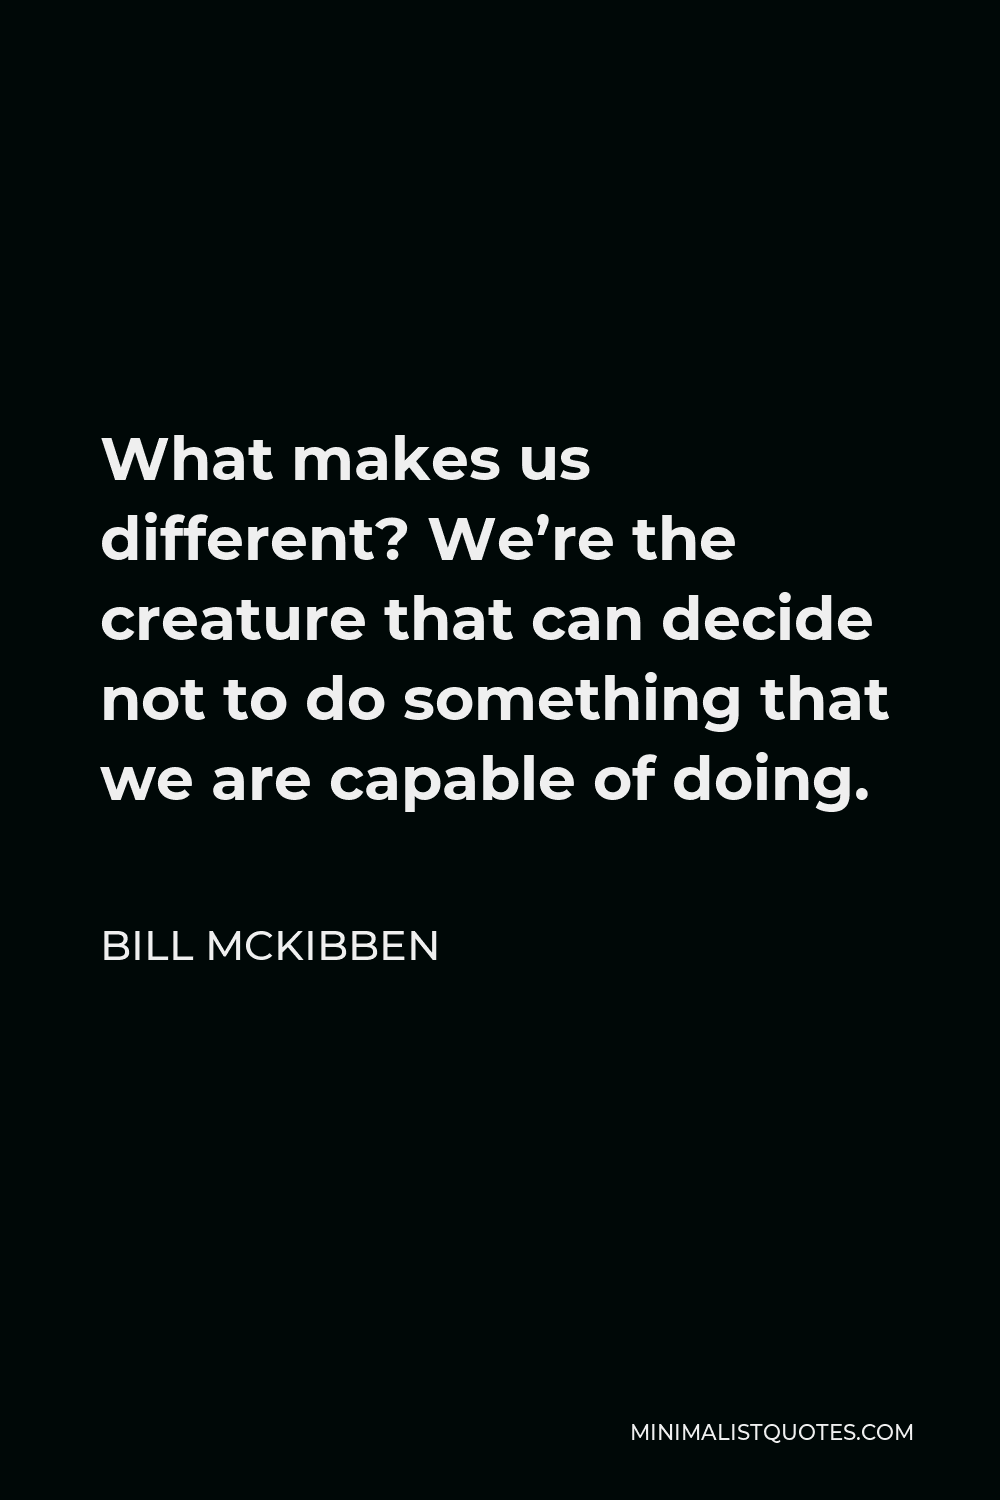 Bill McKibben Quote - What makes us different? We’re the creature that can decide not to do something that we are capable of doing.